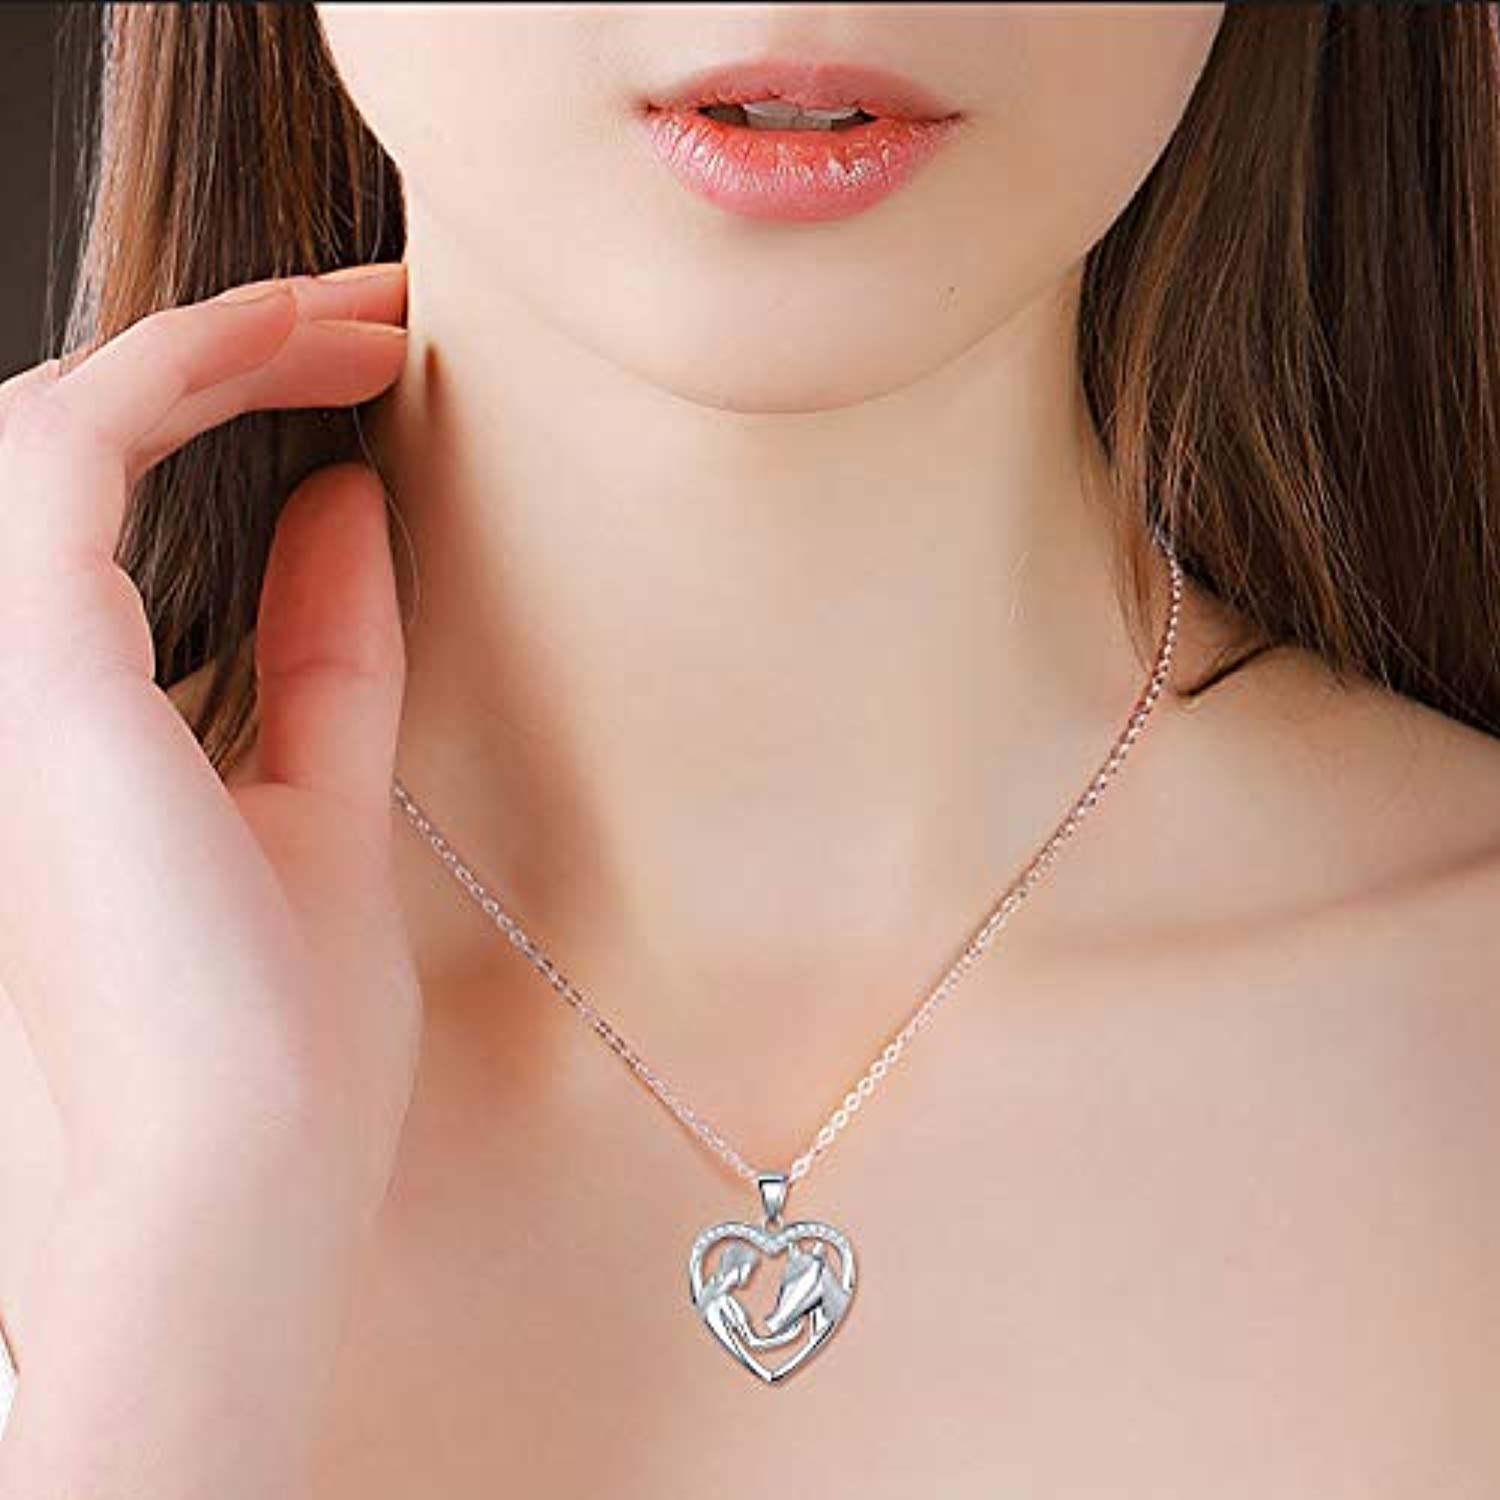 S925 Sterling silver Horse  in Heart Pendant Necklace Jewelry for Women